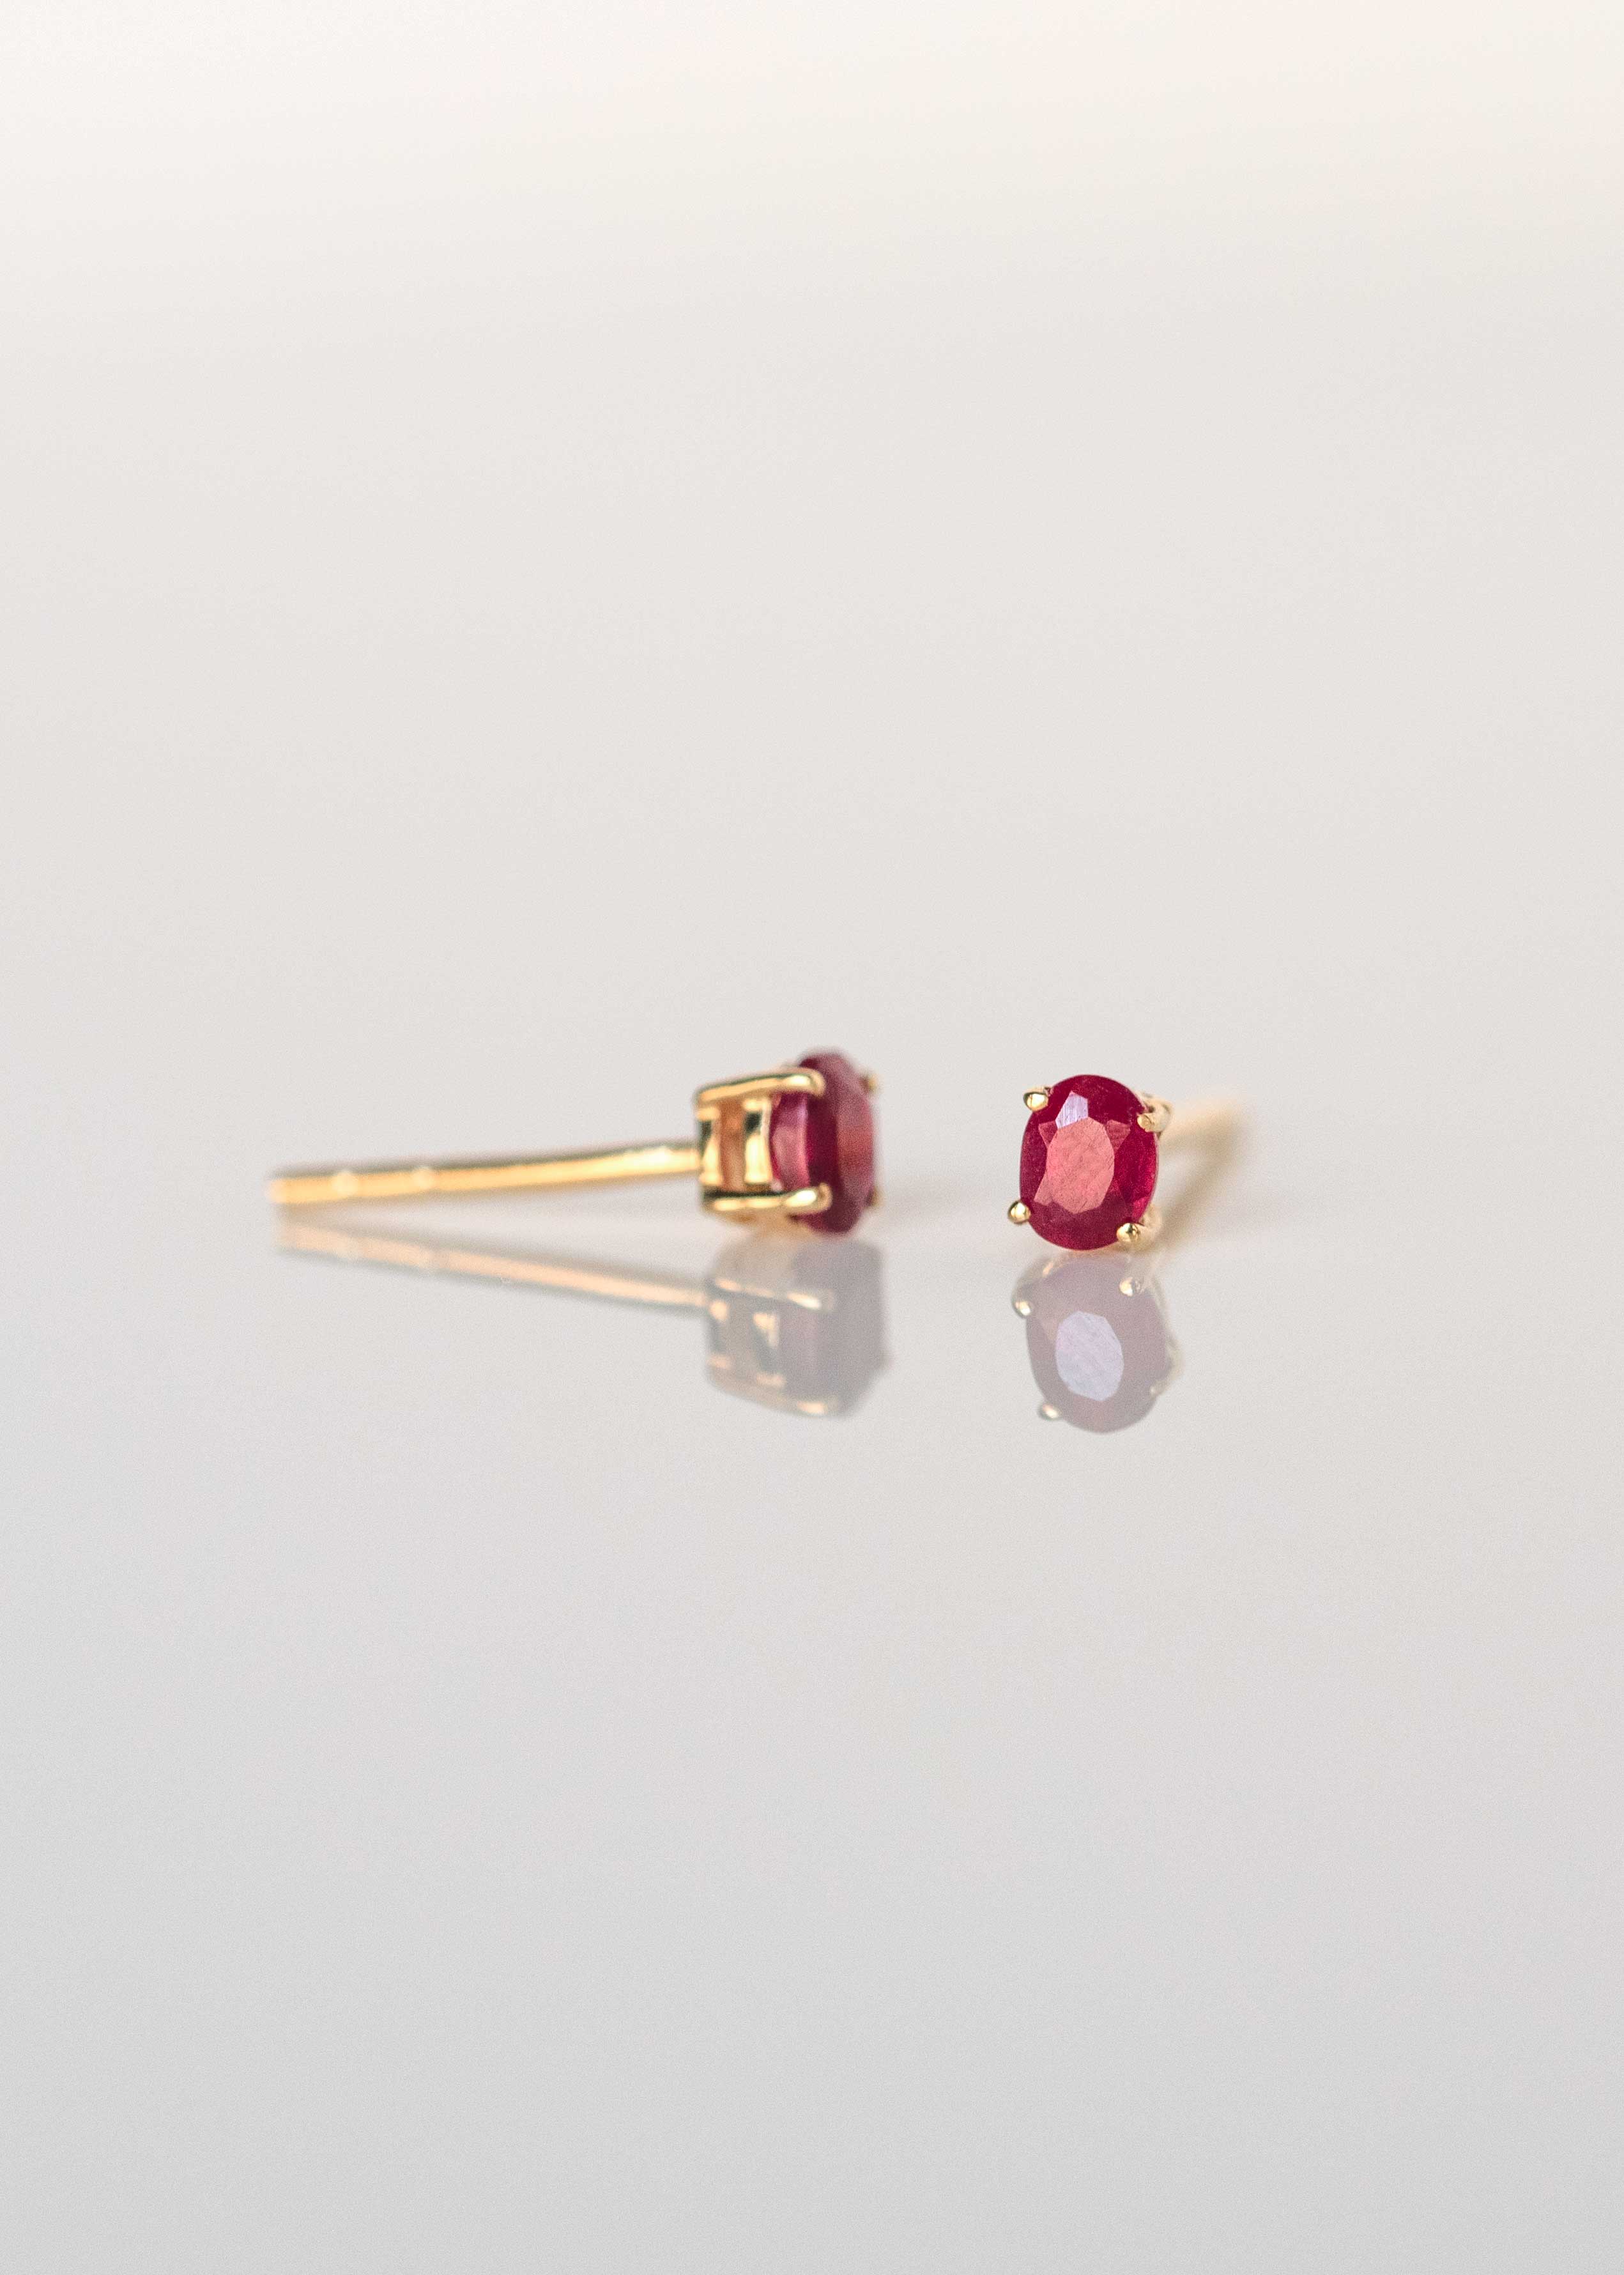 Gemstone earrings, cartilage dainty tiny studs for girls, genuine red ruby